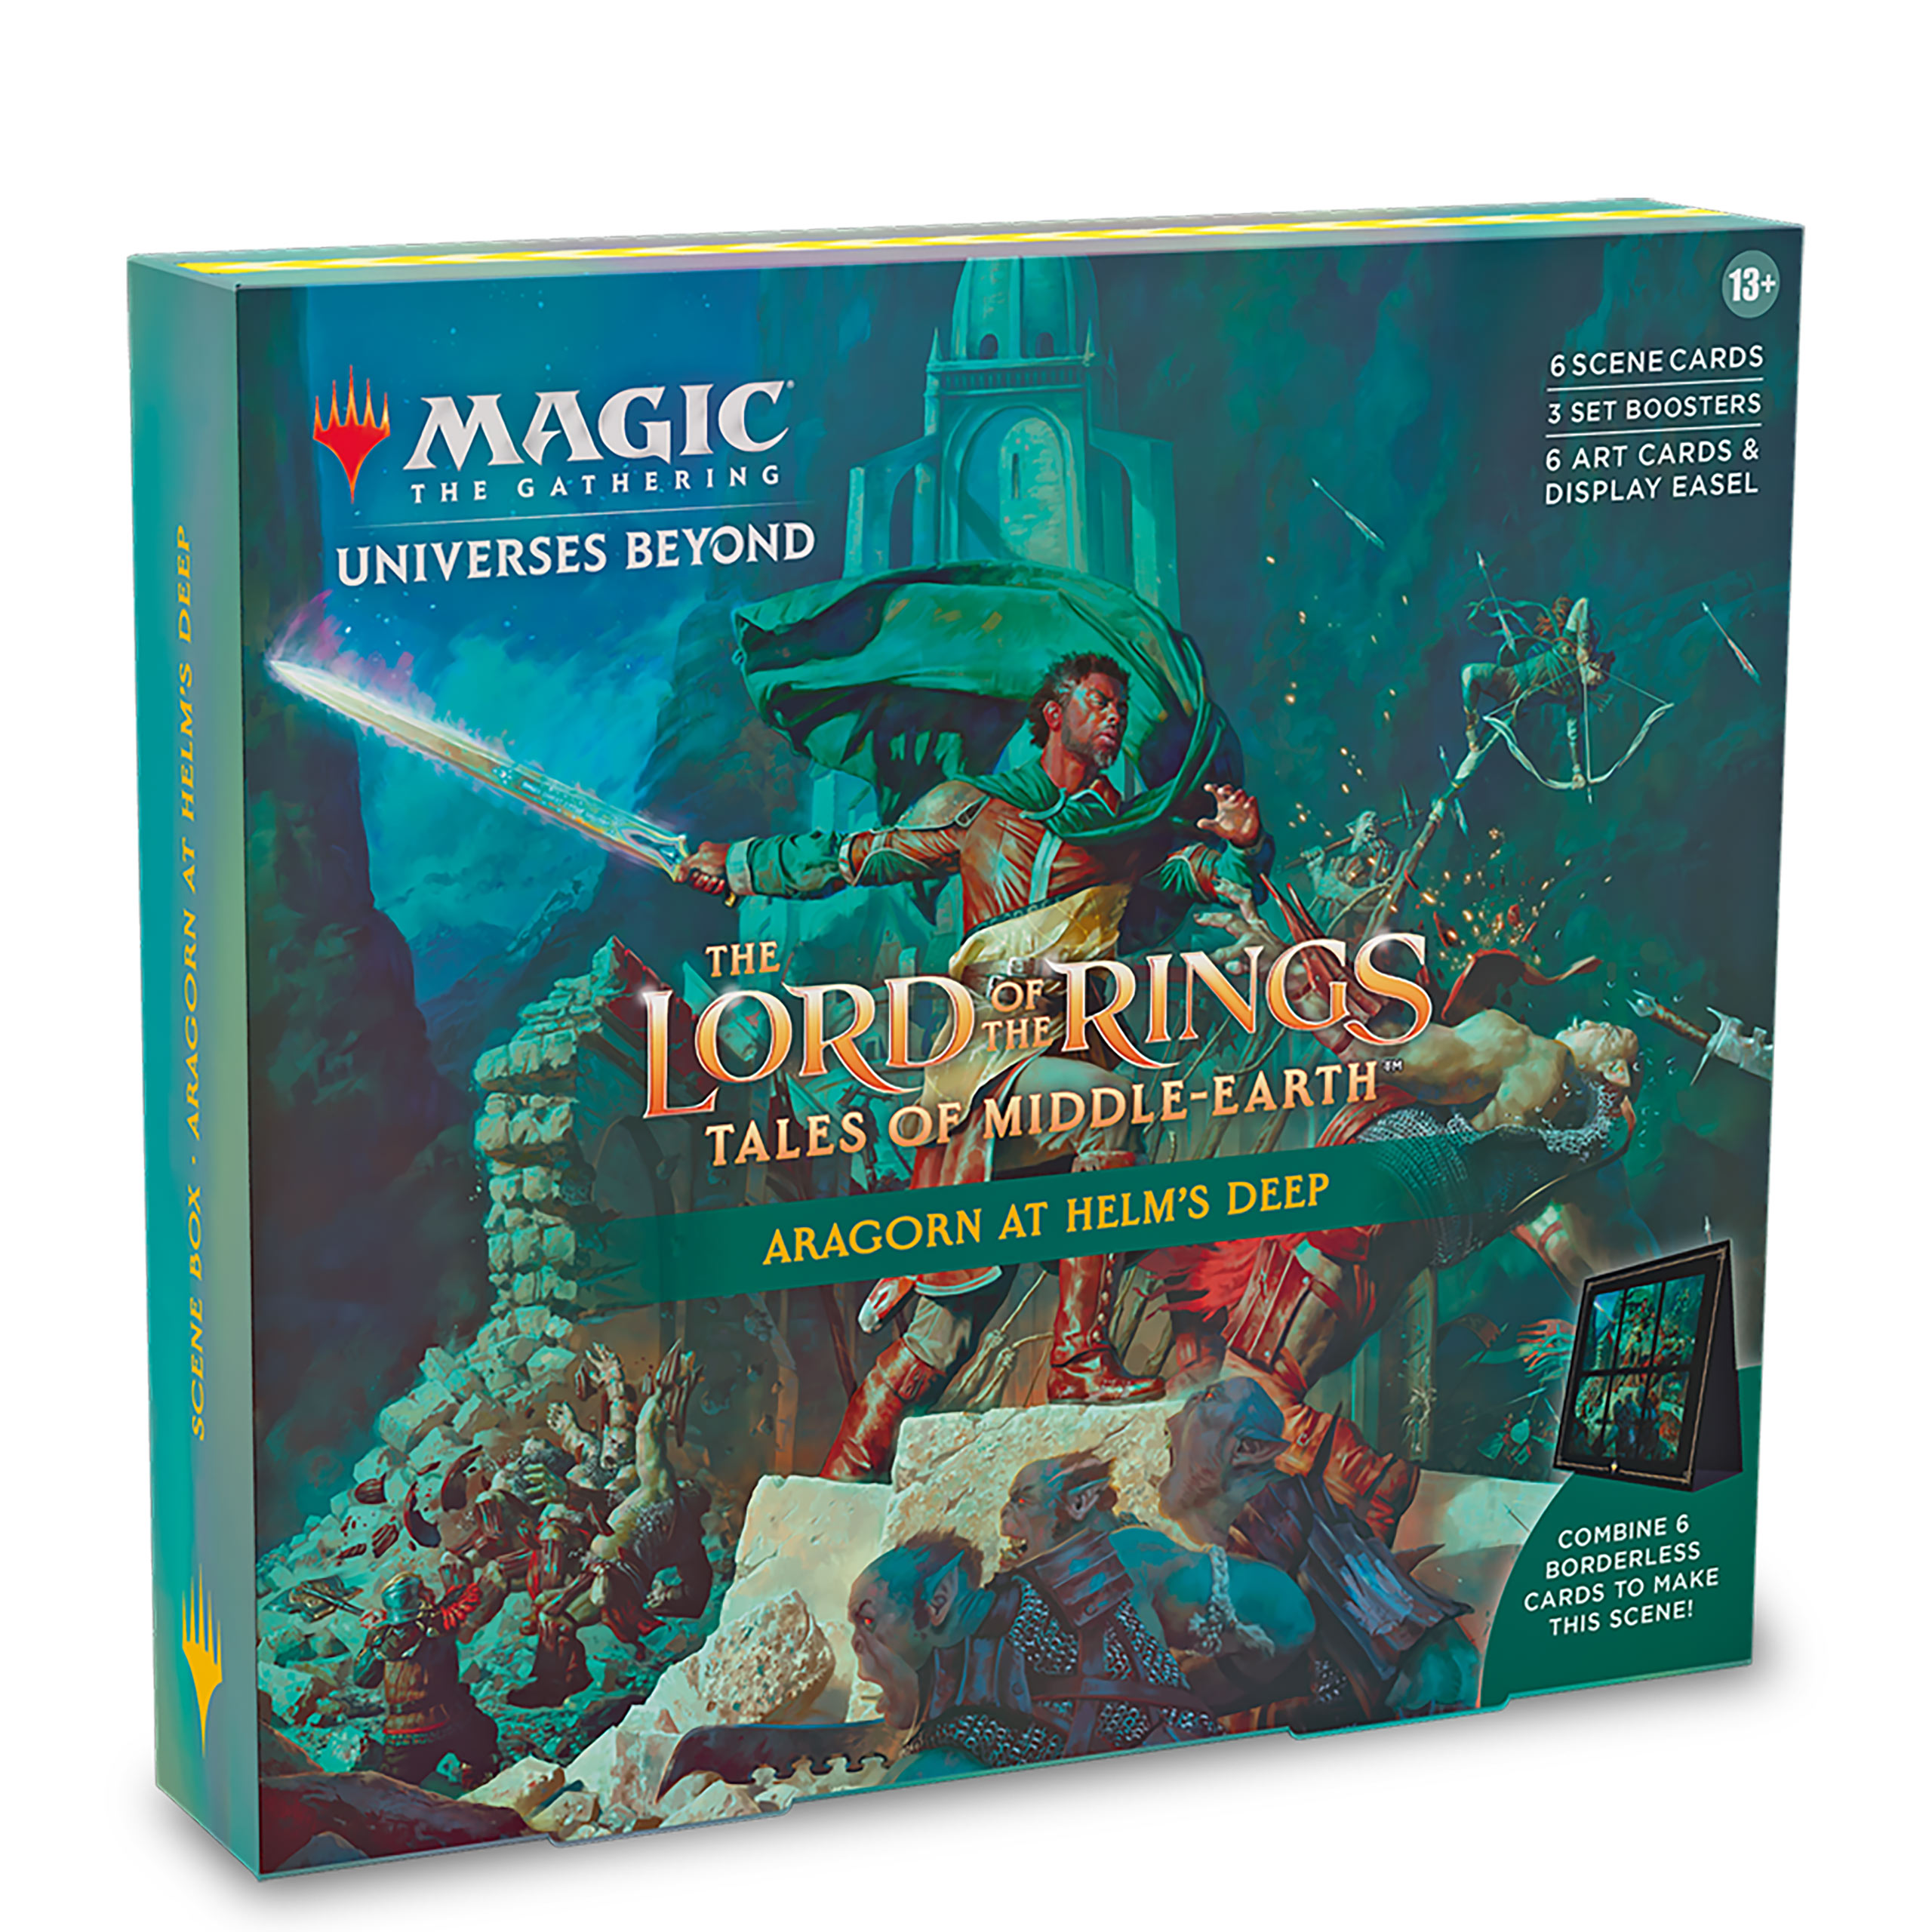 Herr der Ringe Tales of Middle-Earth - Aragorn At Helm's Deep Character Box - Magic The Gathering